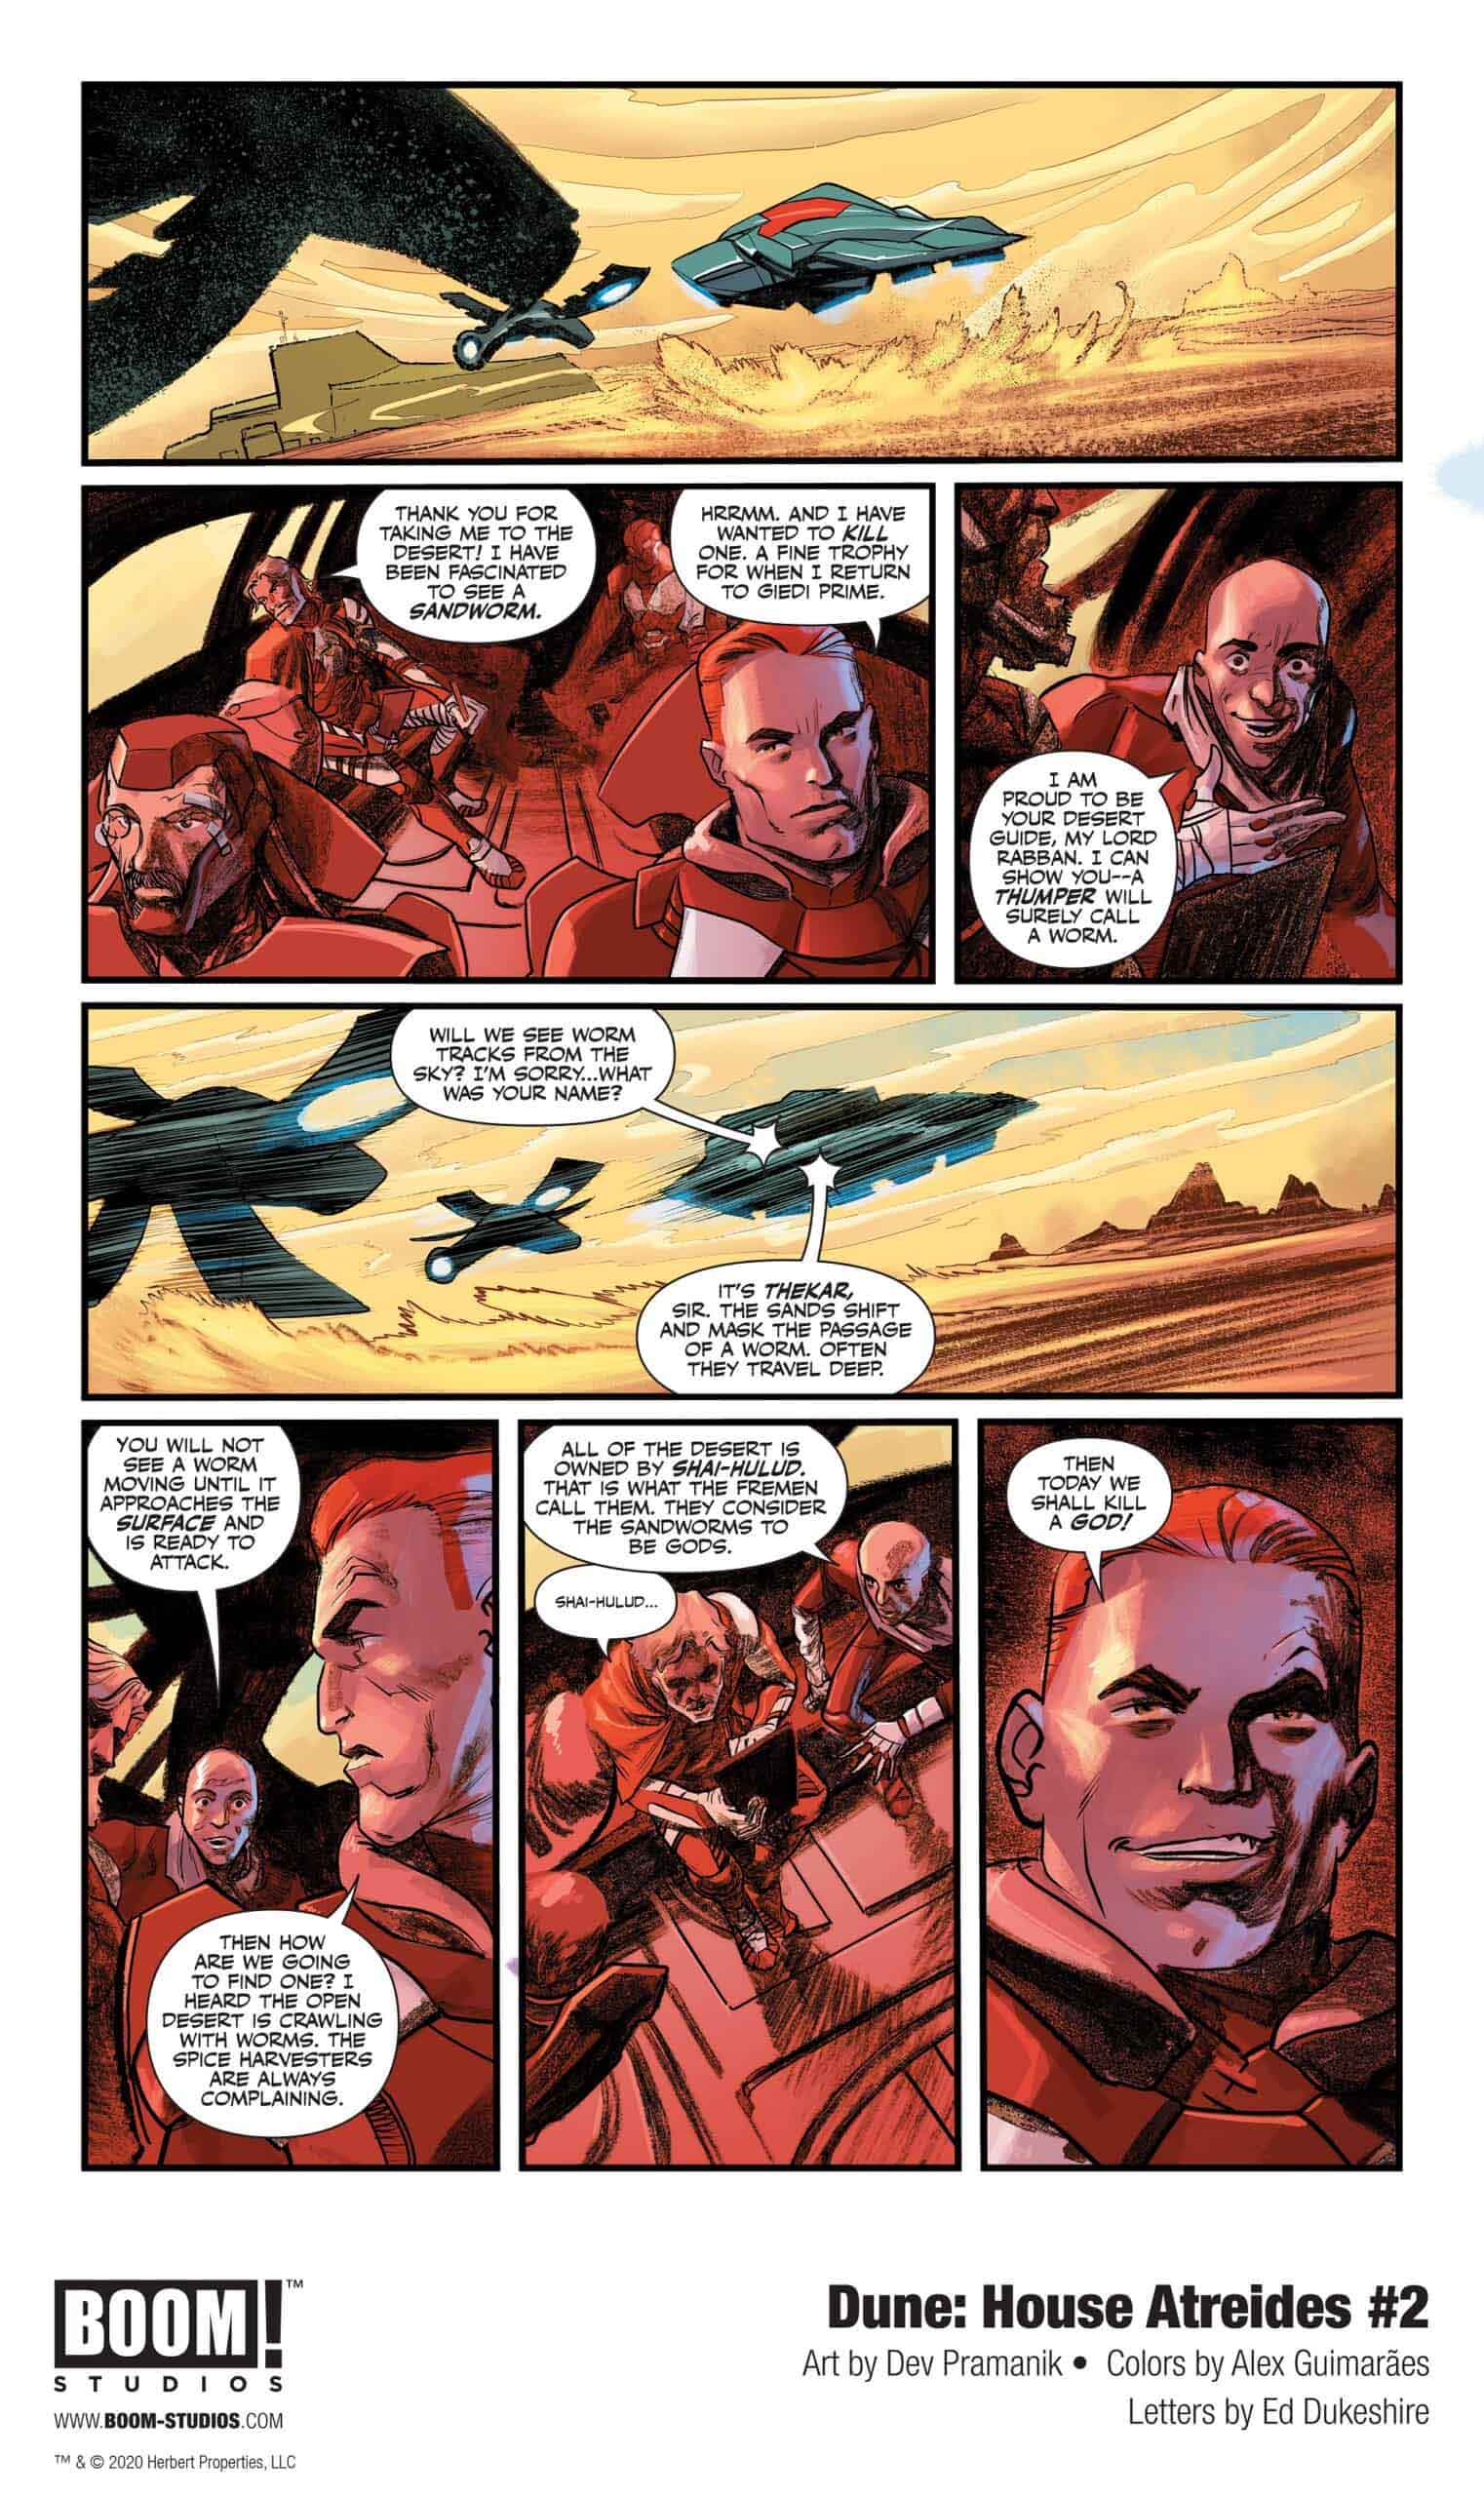 Dune: House Atreides comic series. Issue #2, preview page 3.